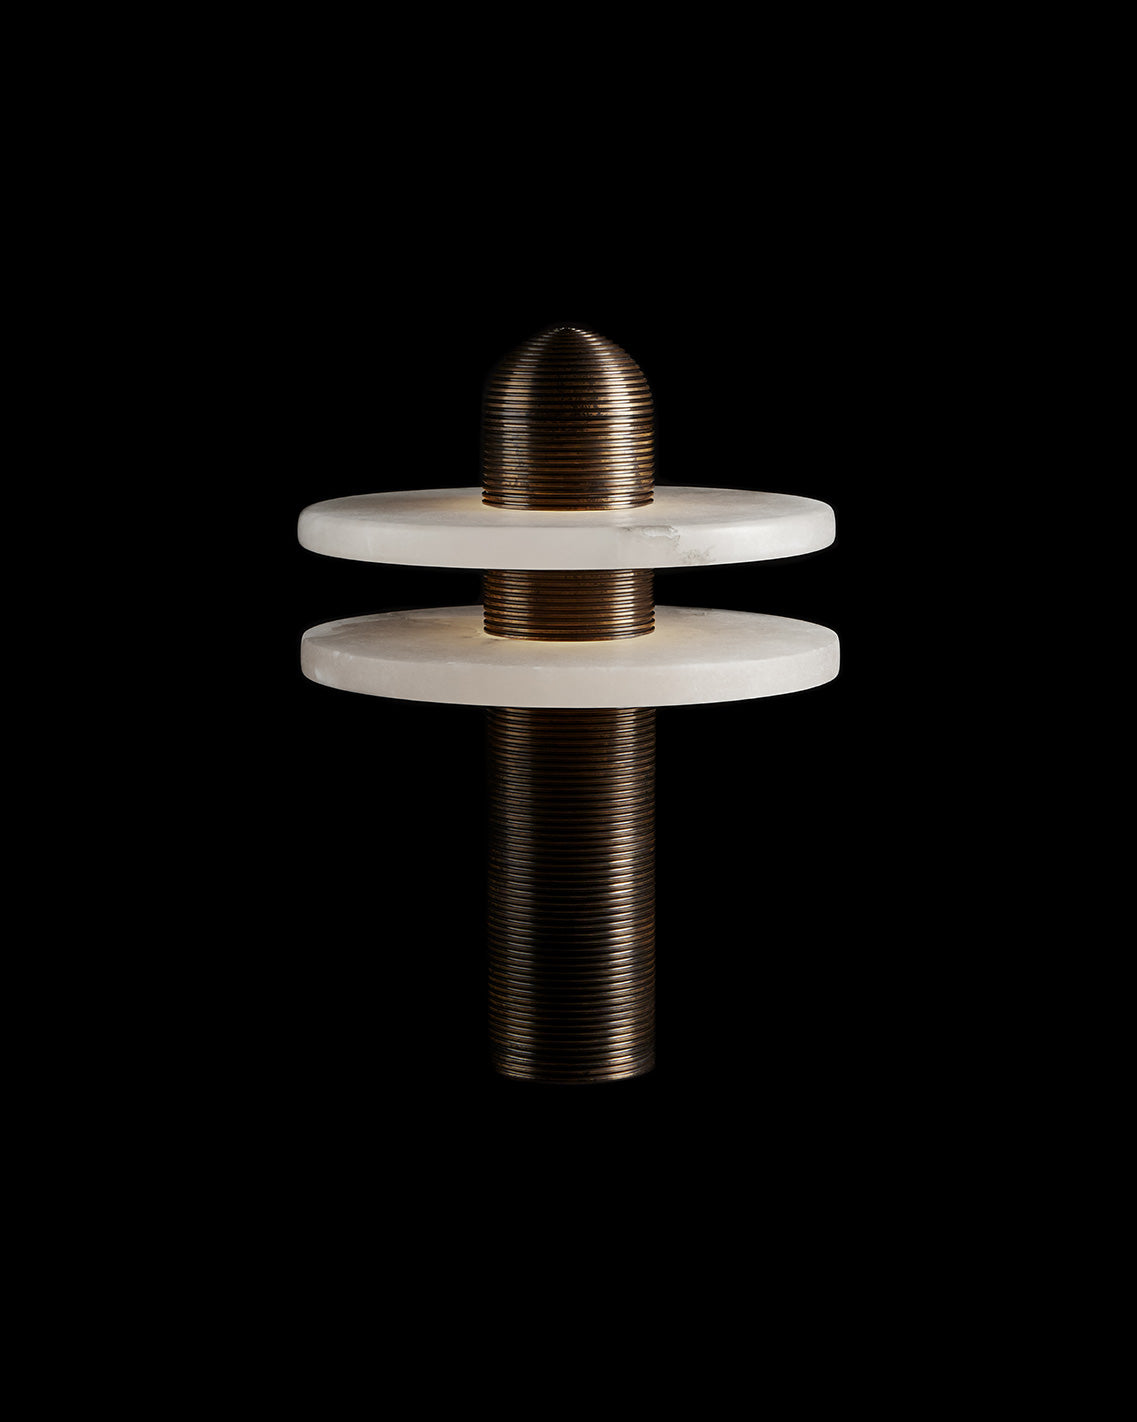 MEDIAN table lamp in Oil-Rubbed Bronze finish against a black background. 